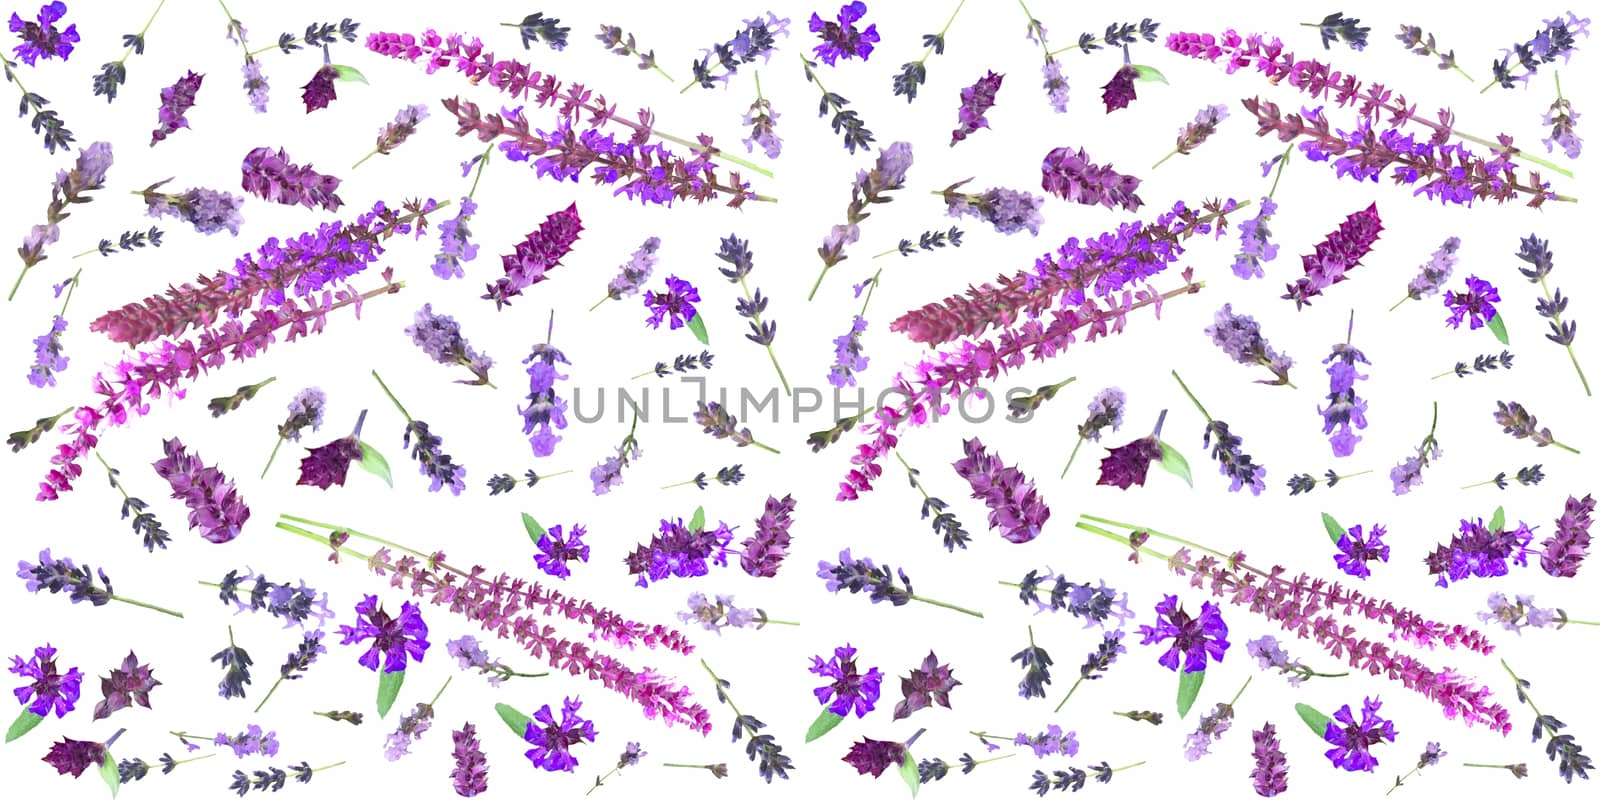 Flower pattern of wildflowers. Composition of lavender and sage flowers and herbs. Top view. Floral abstract background isolated on white background.   